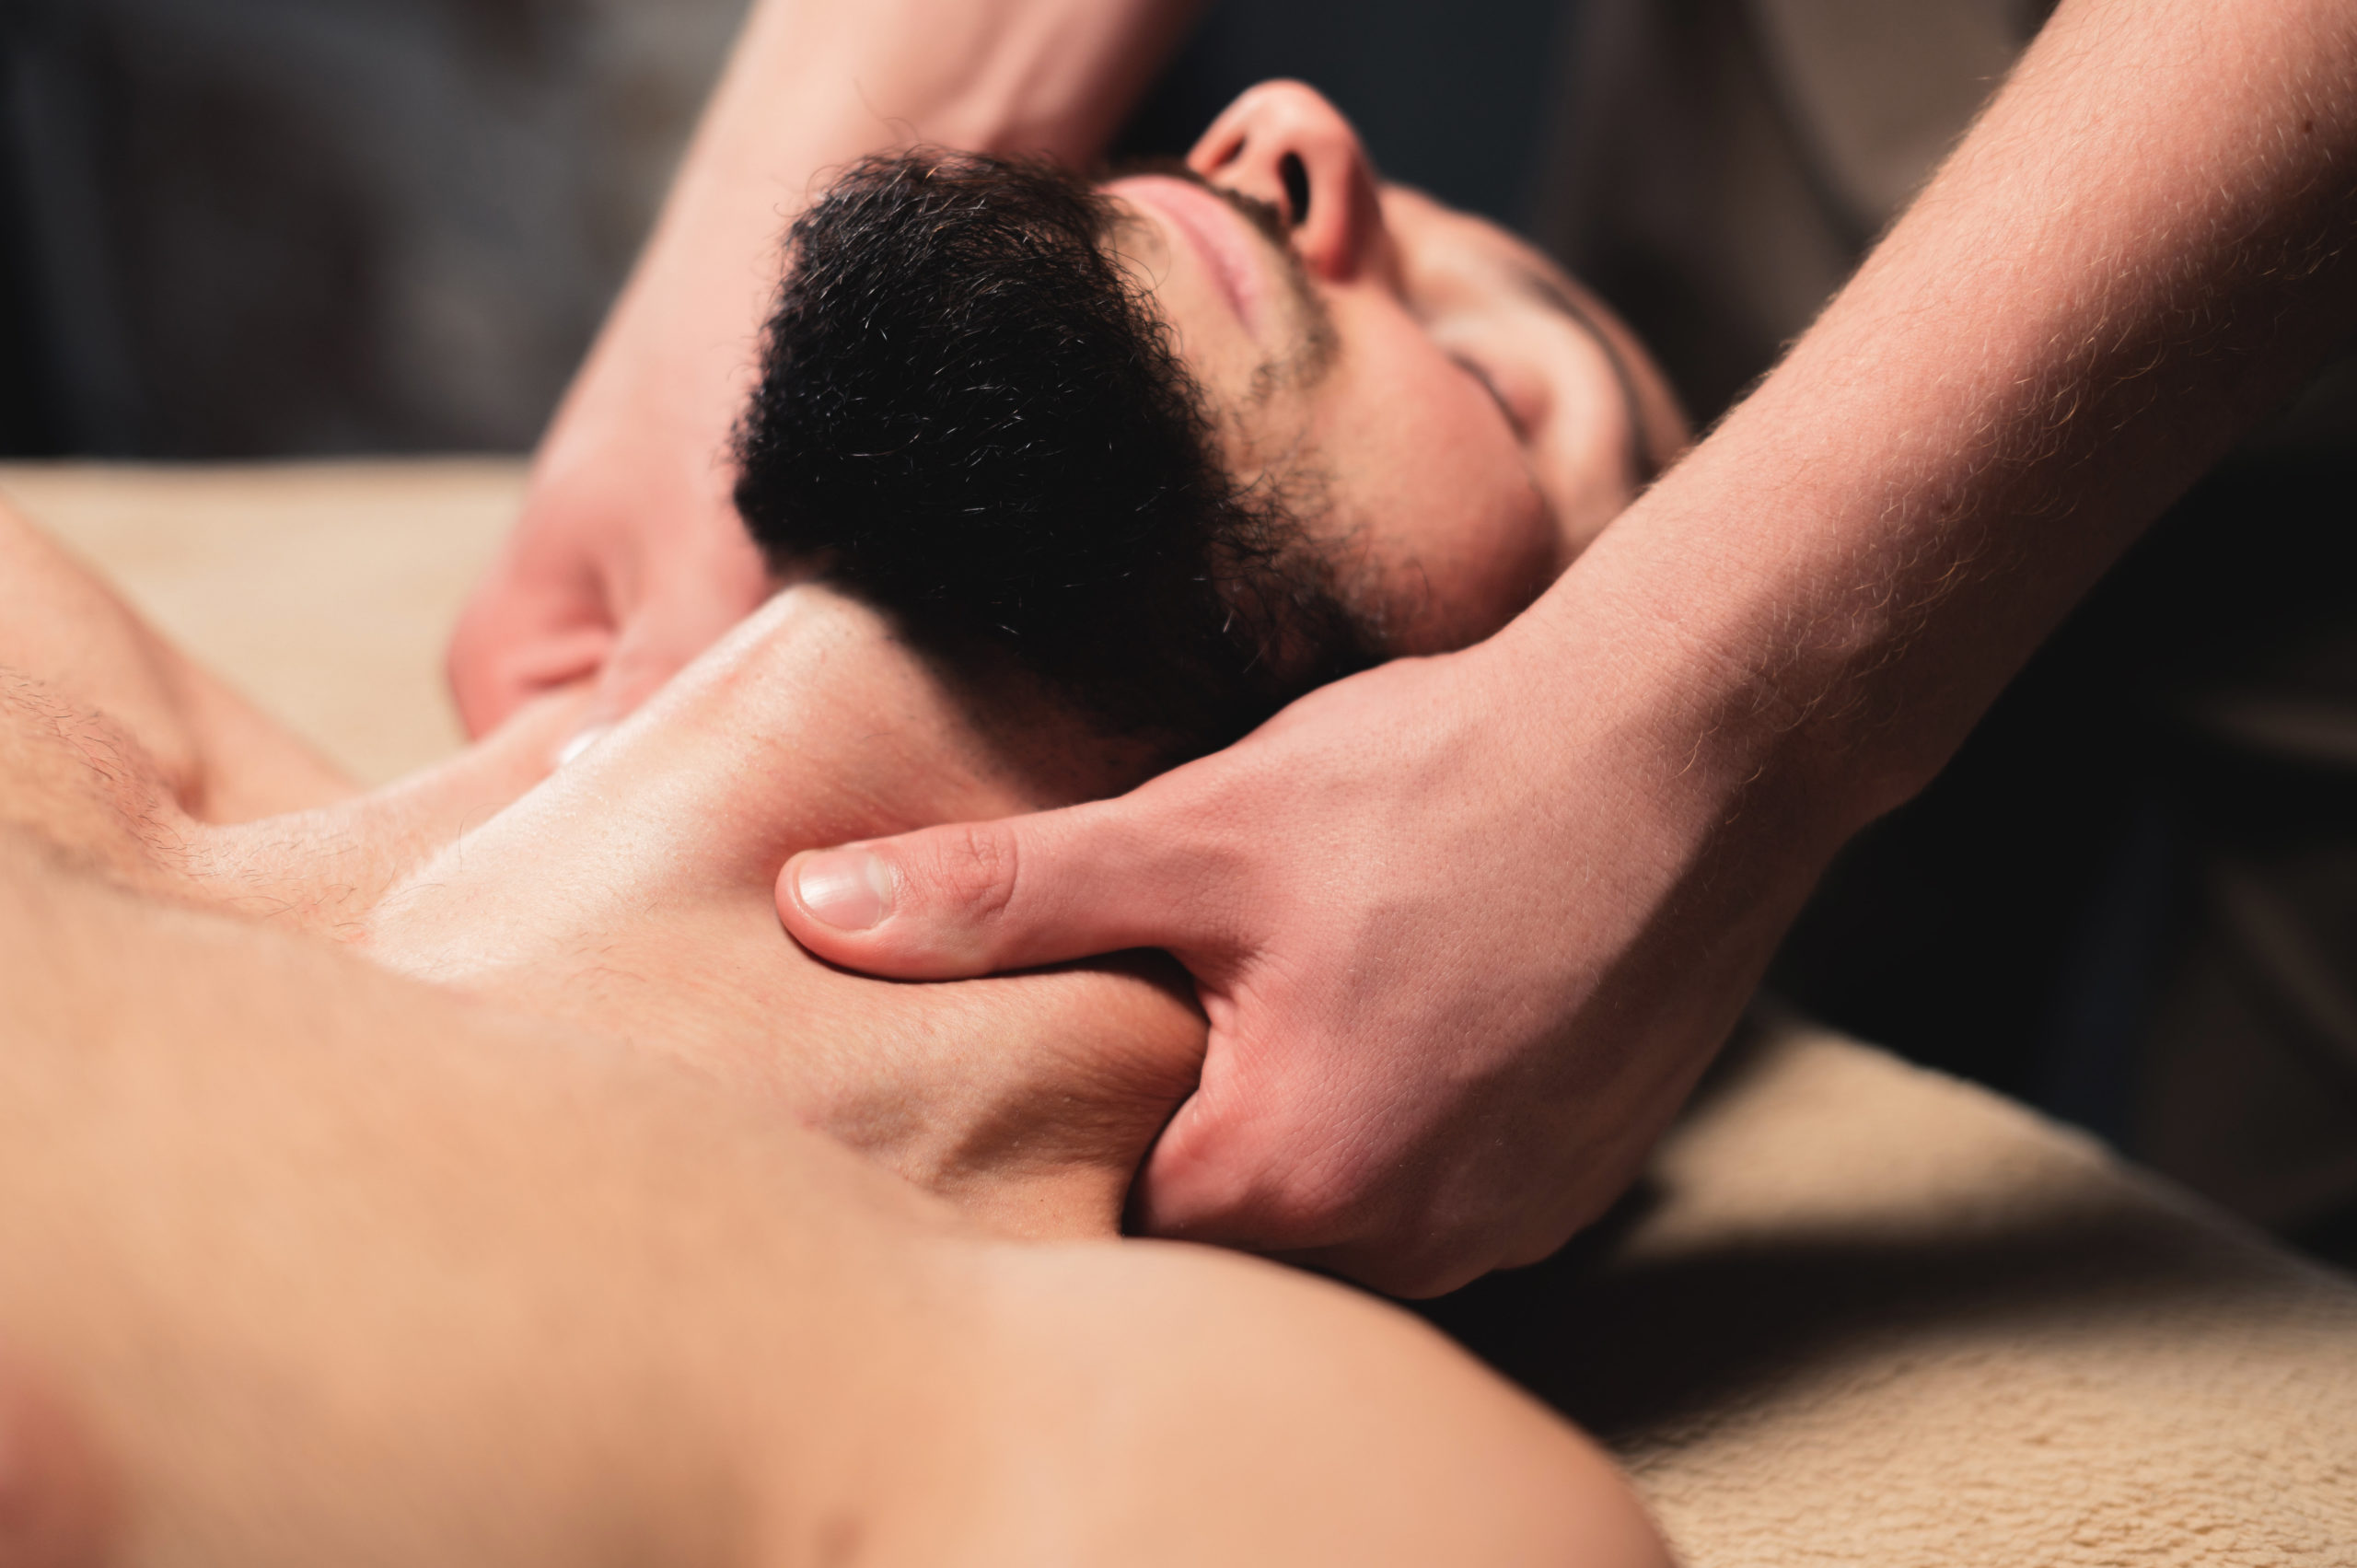 Close-up Professional neck massage to a bearded male athlete in a dark room of a spa massage room.